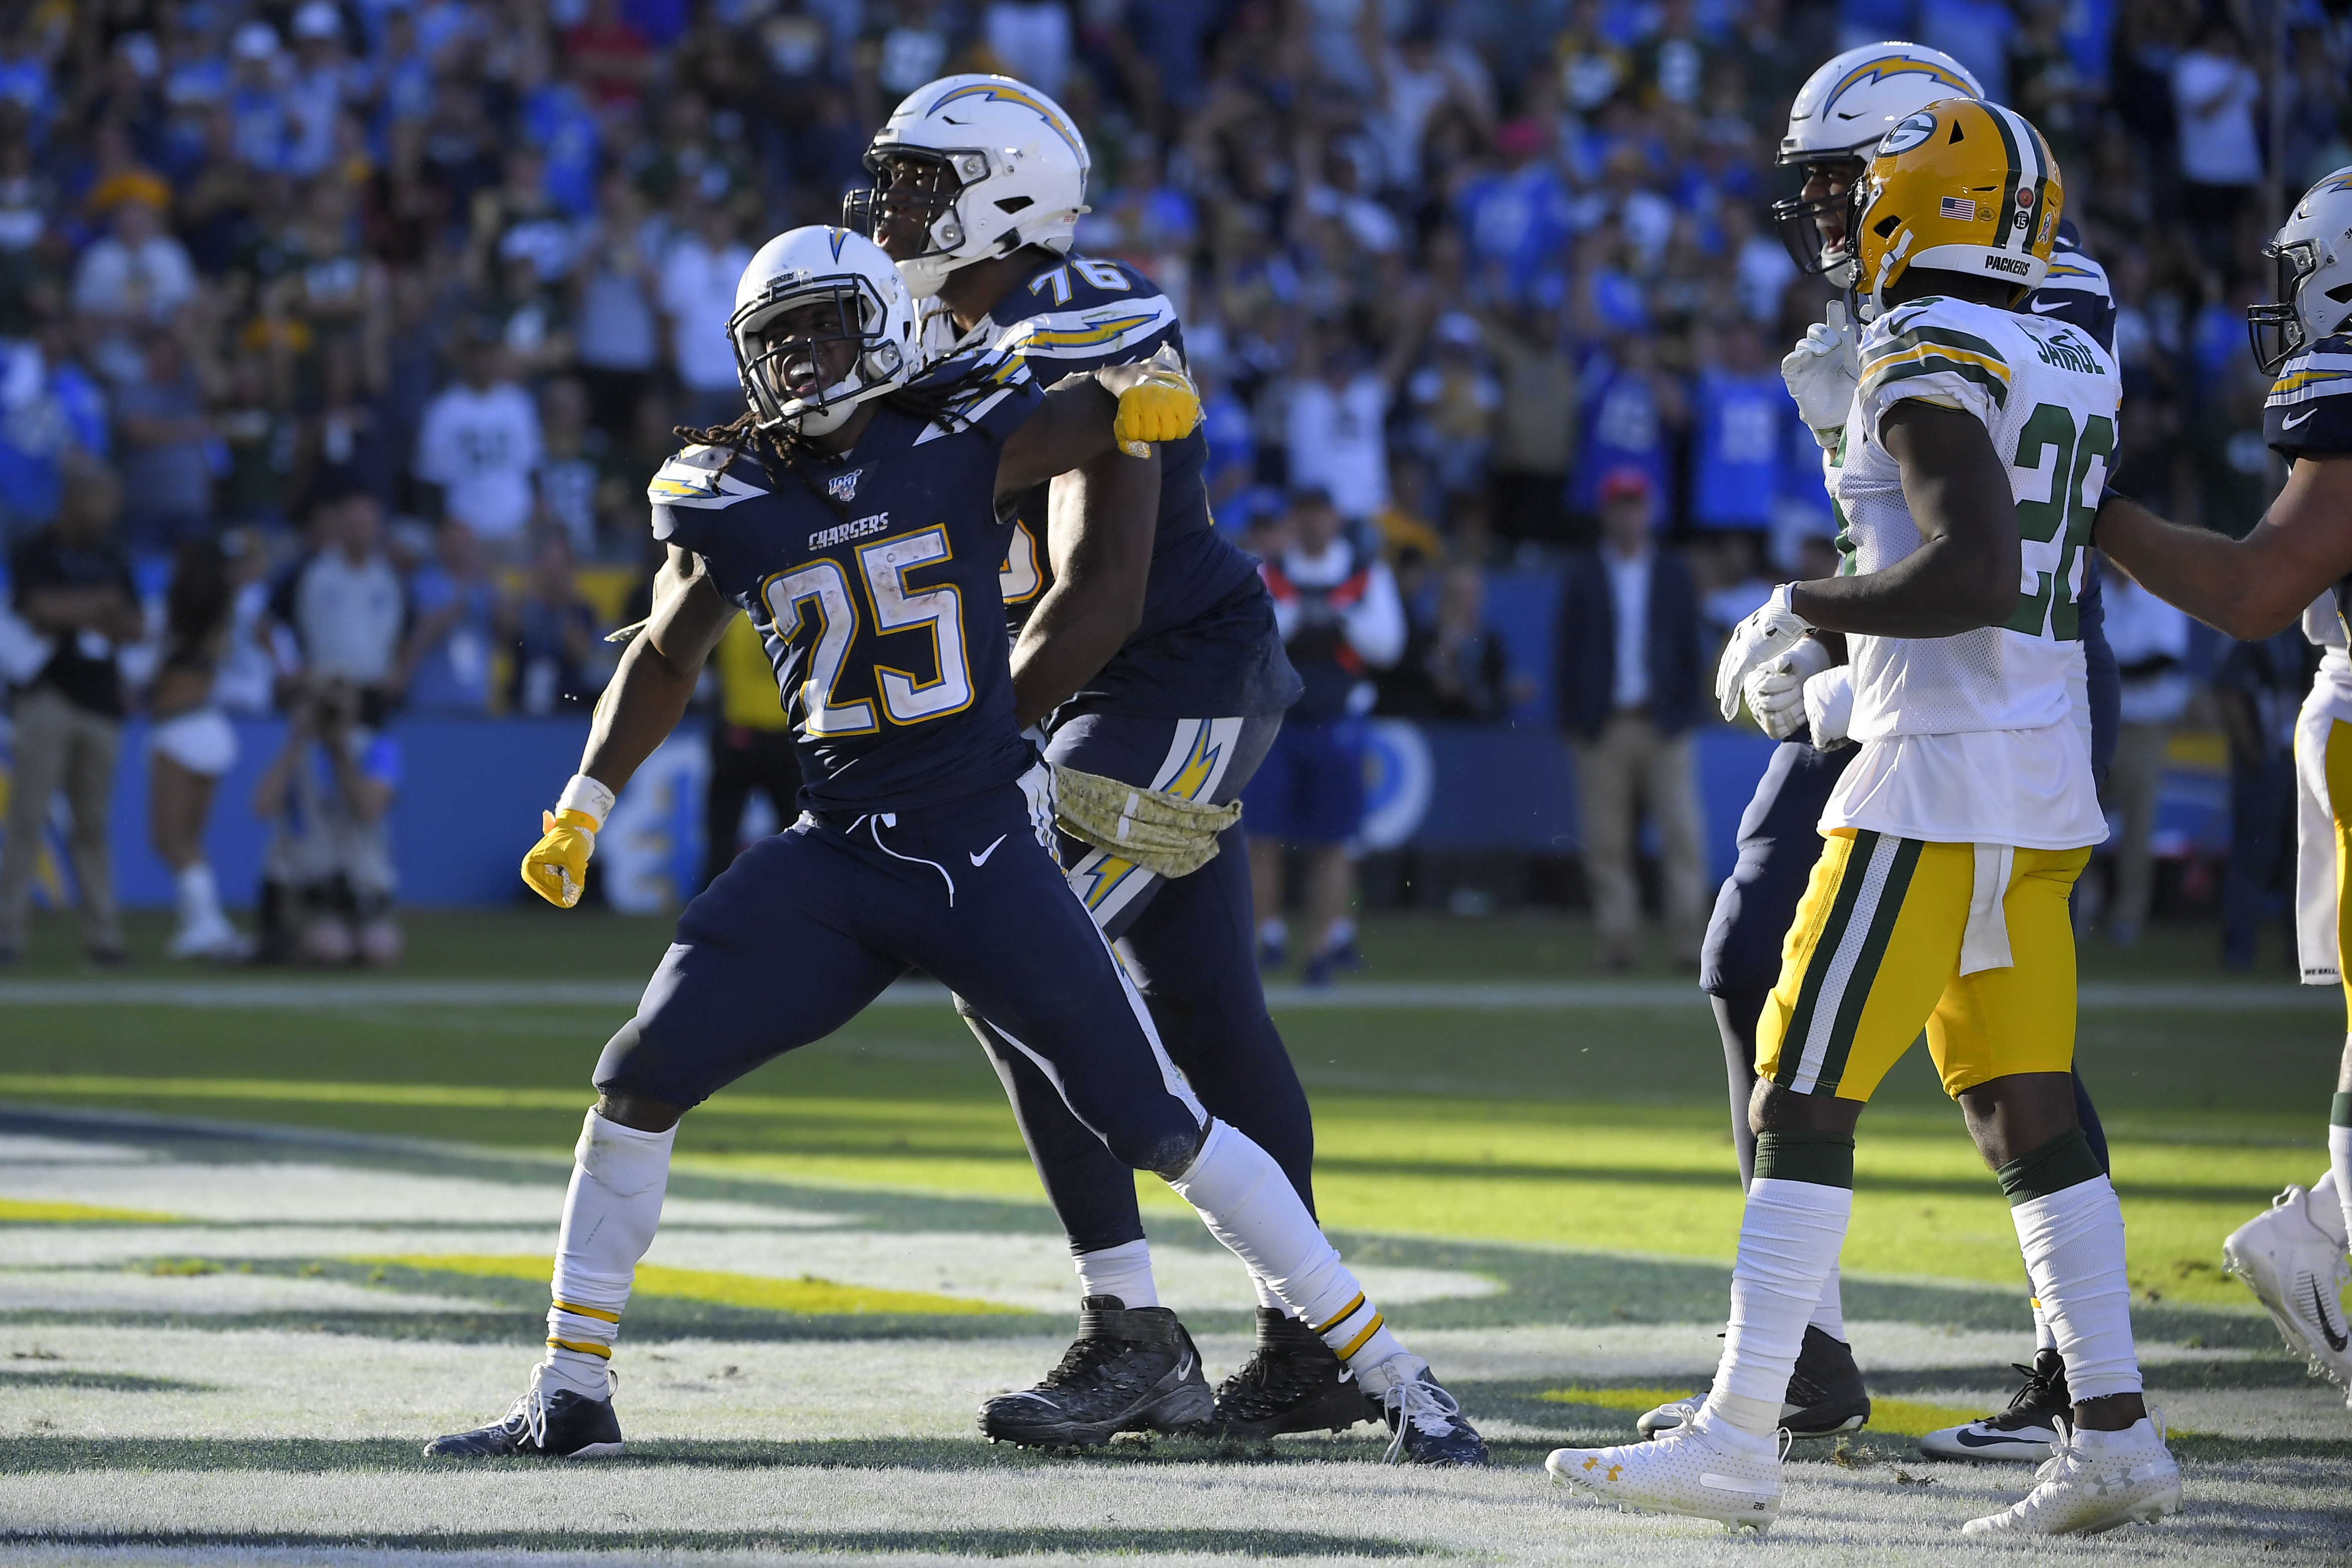 Are Chargers back on track? Thursday will provide clarity